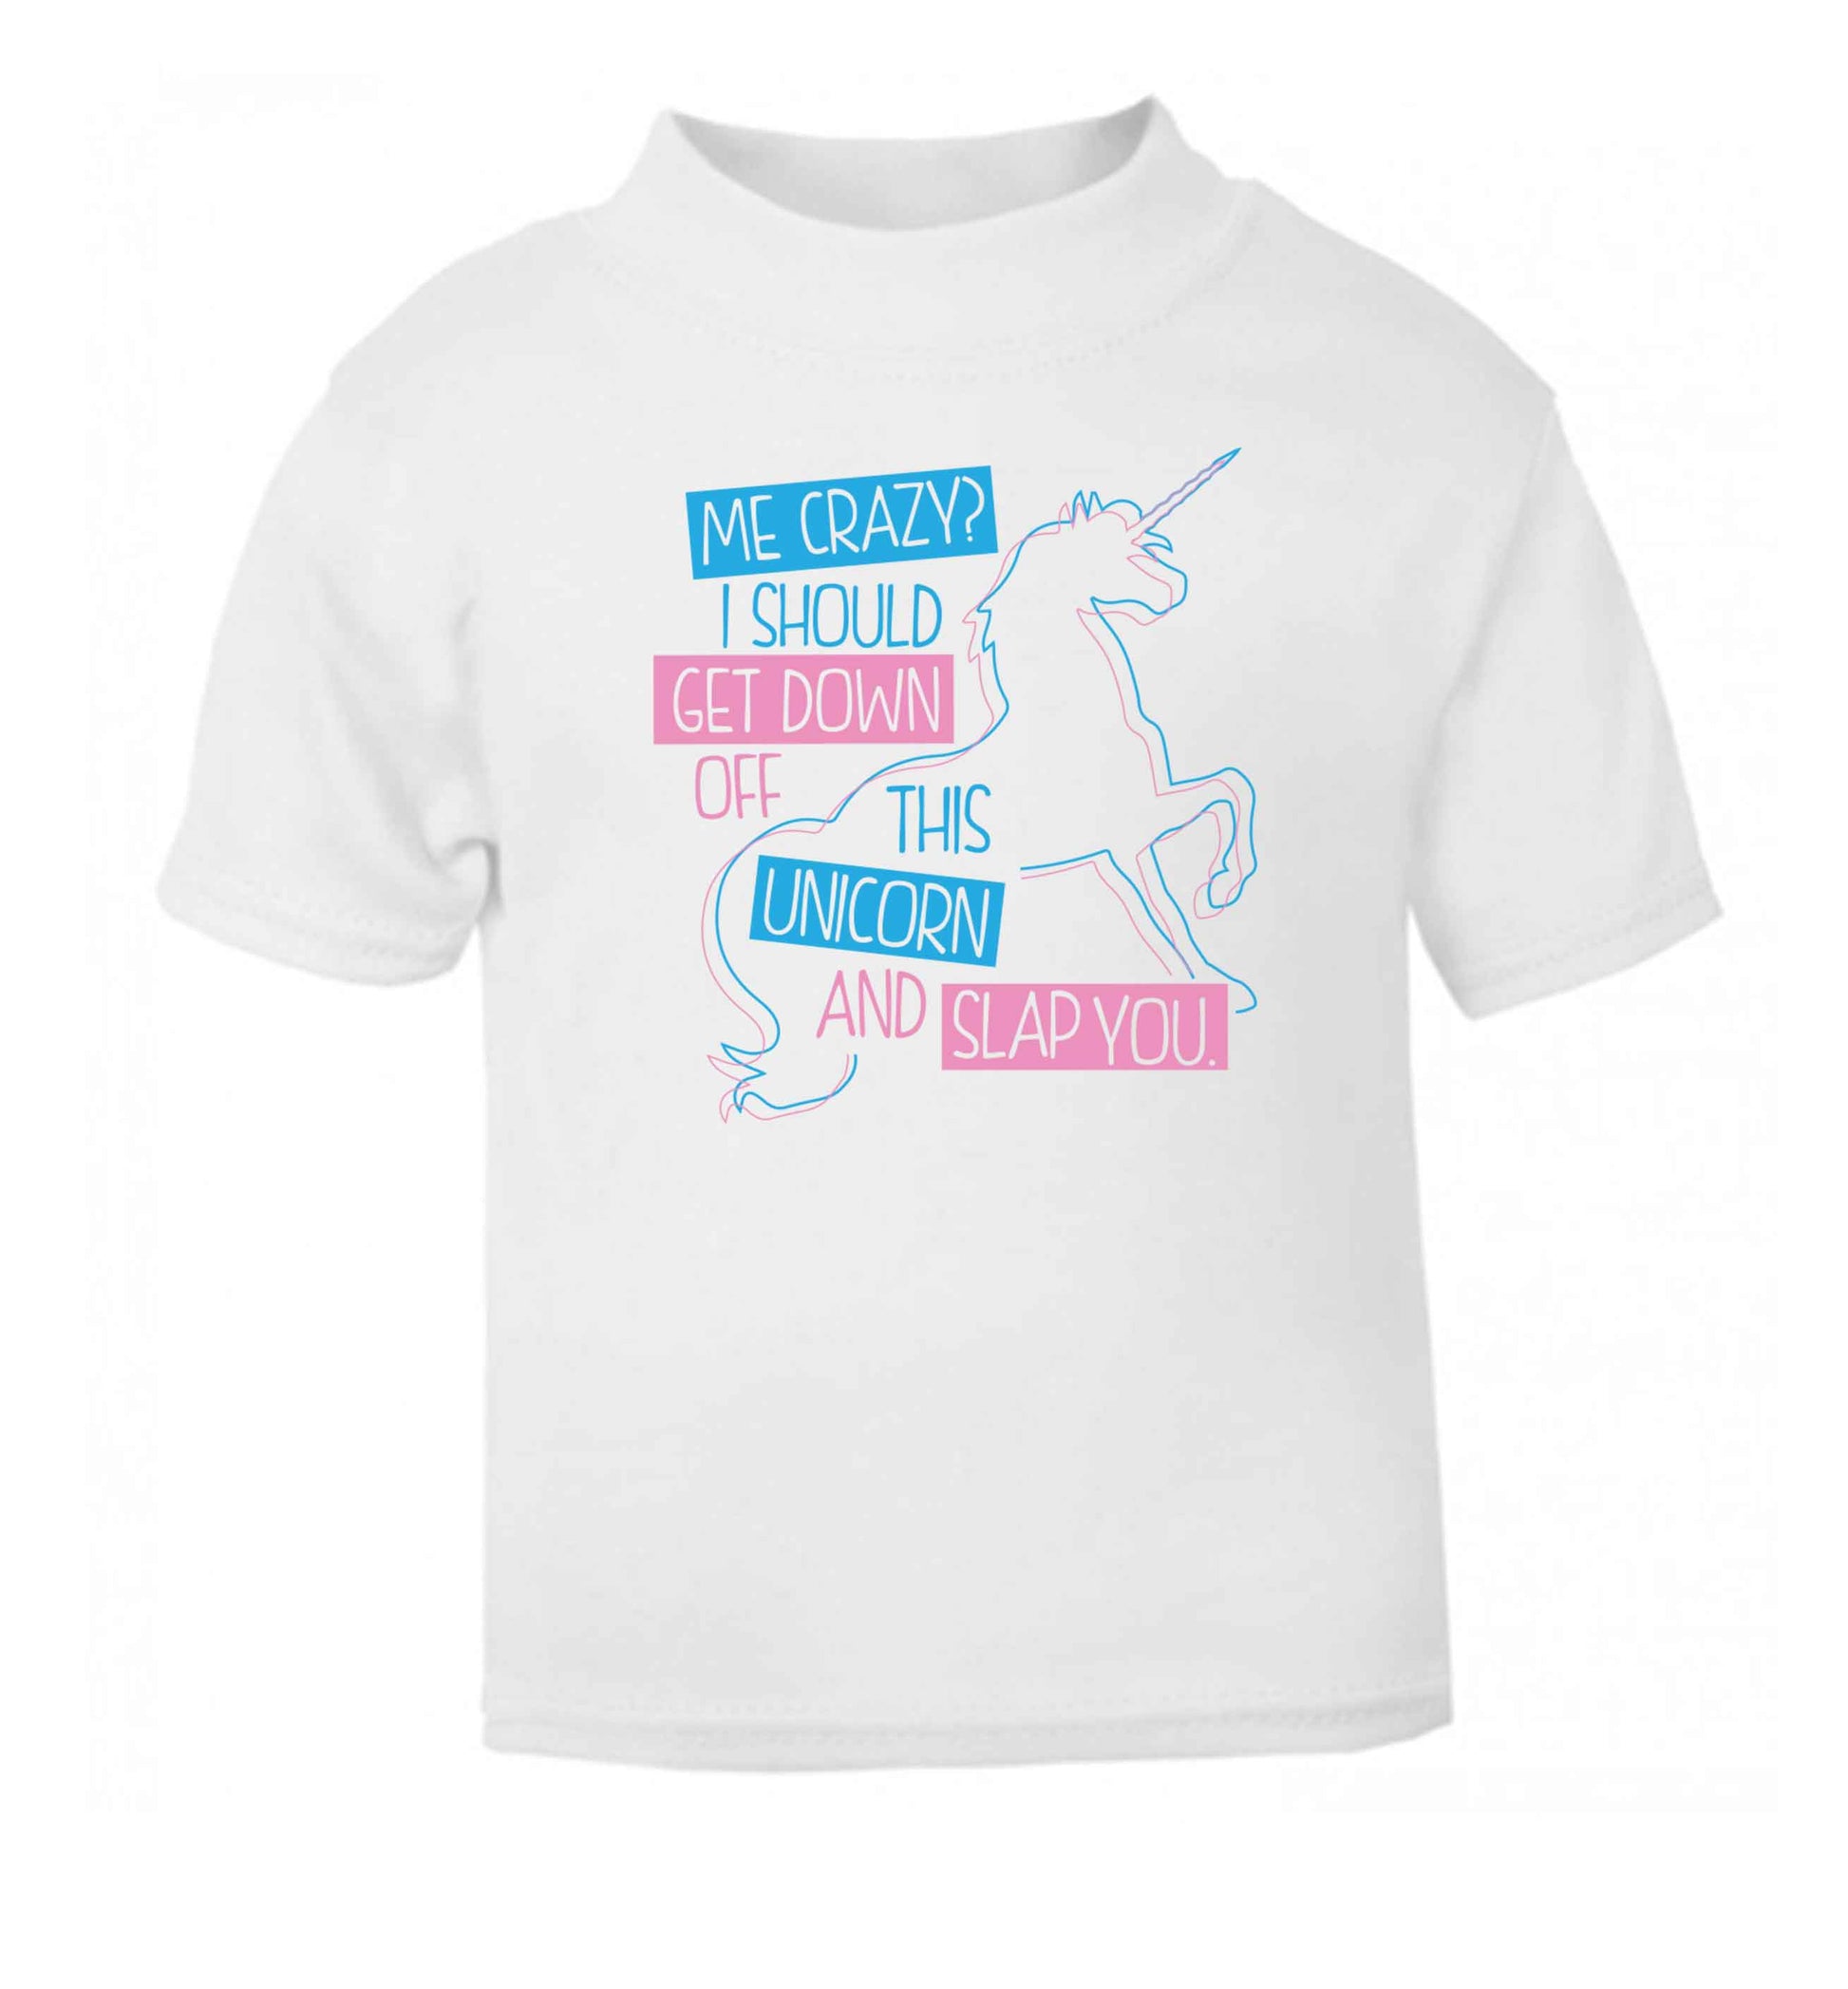 Me crazy? I should get down off this unicorn and slap you white Baby Toddler Tshirt 2 Years